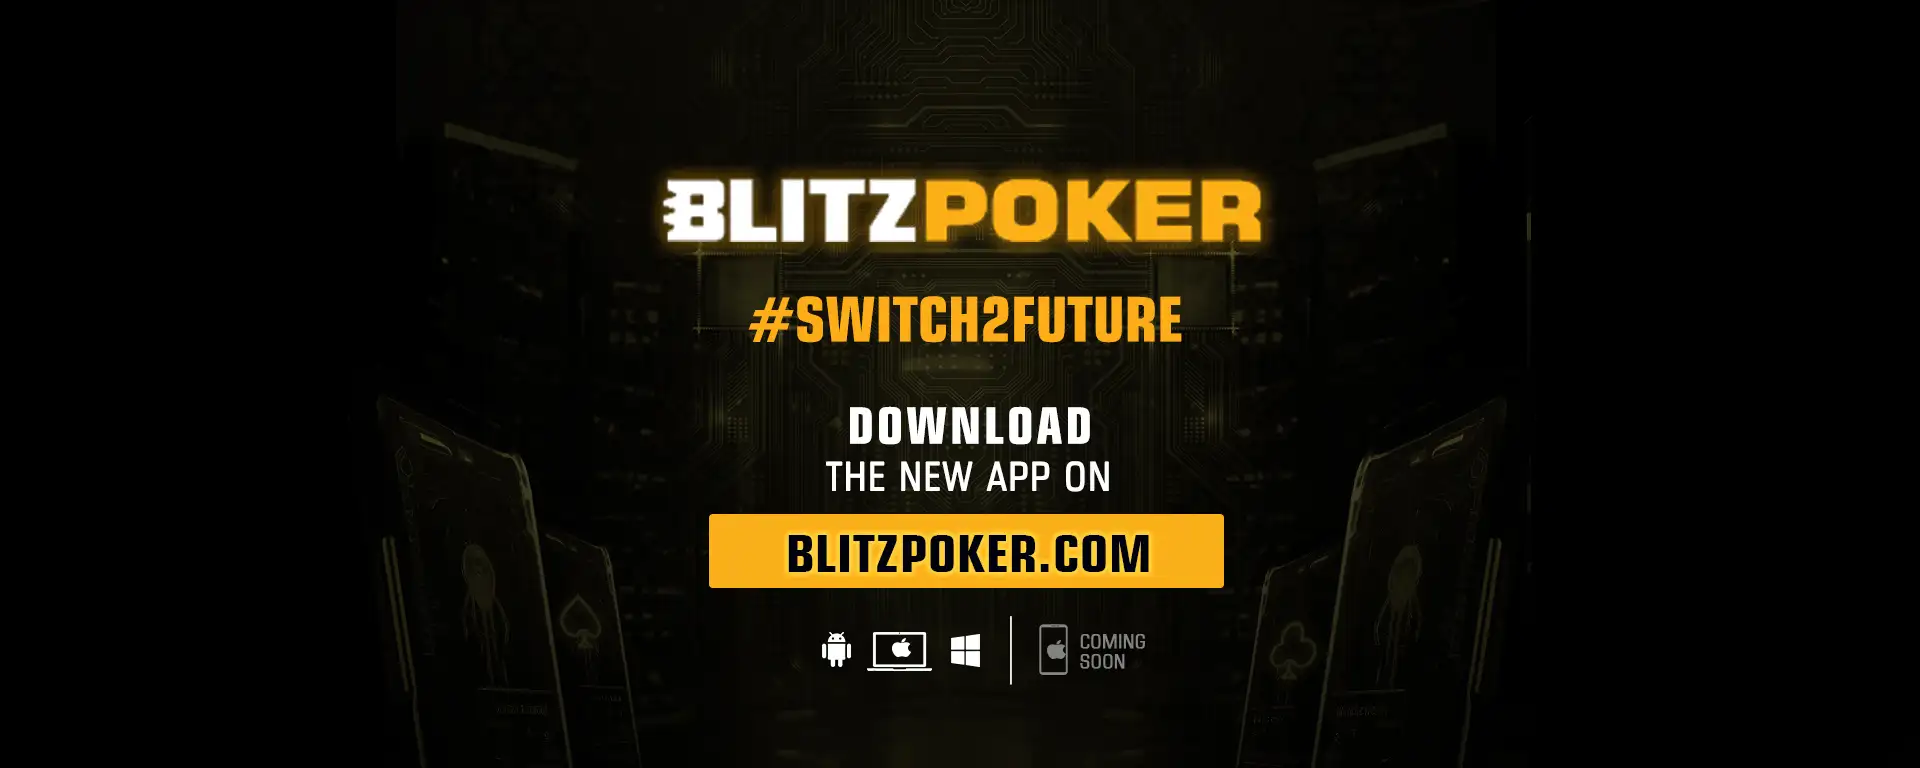 Discover The Exciting New Features of the All New BLITZPOKER App!